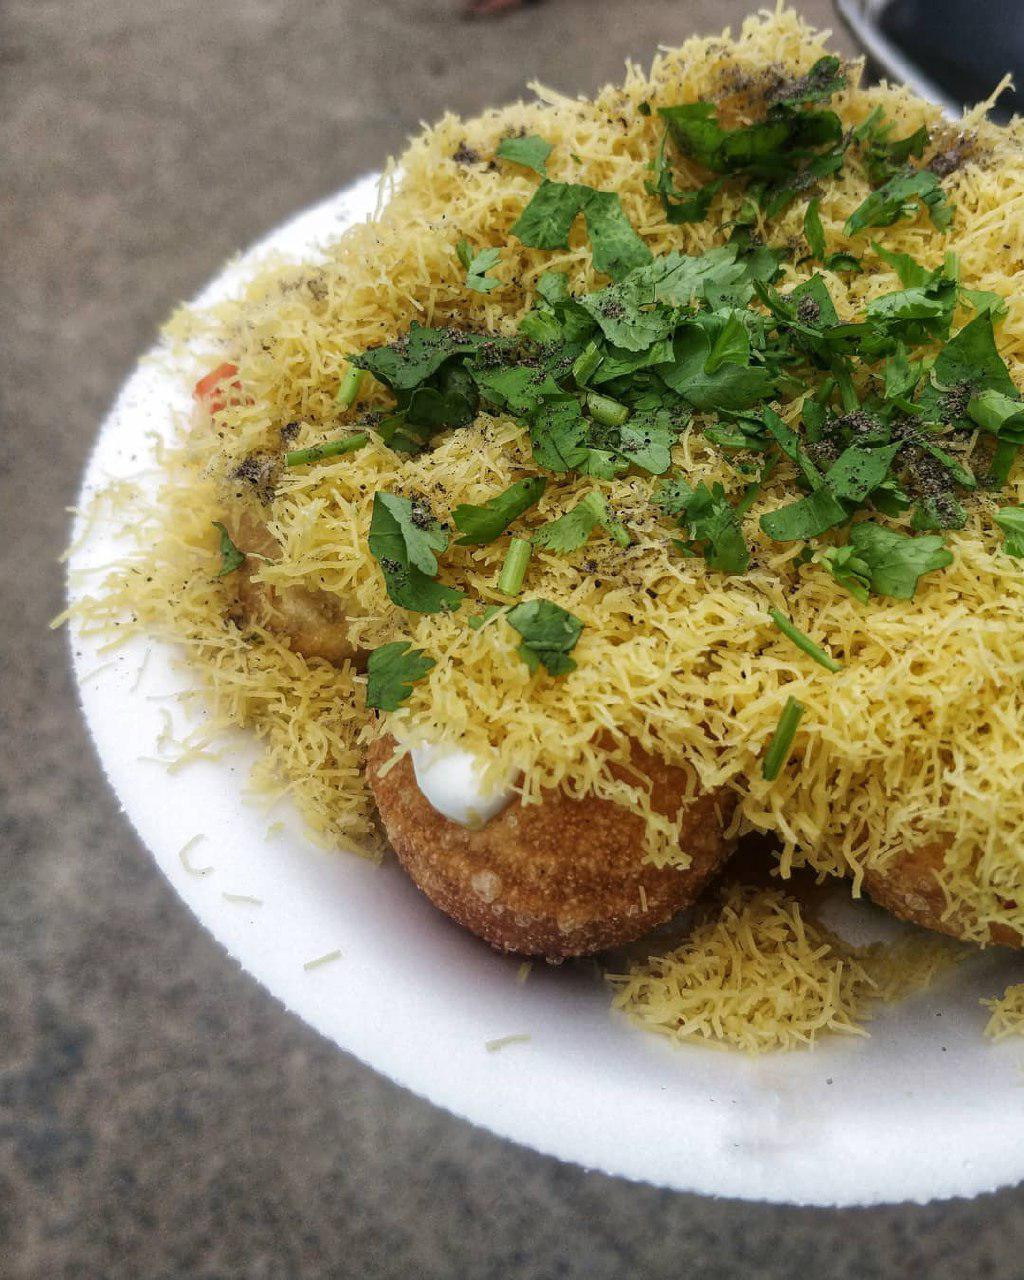 Pocket-friendly joints in Ahmedabad | Budget-friendly, food, street food